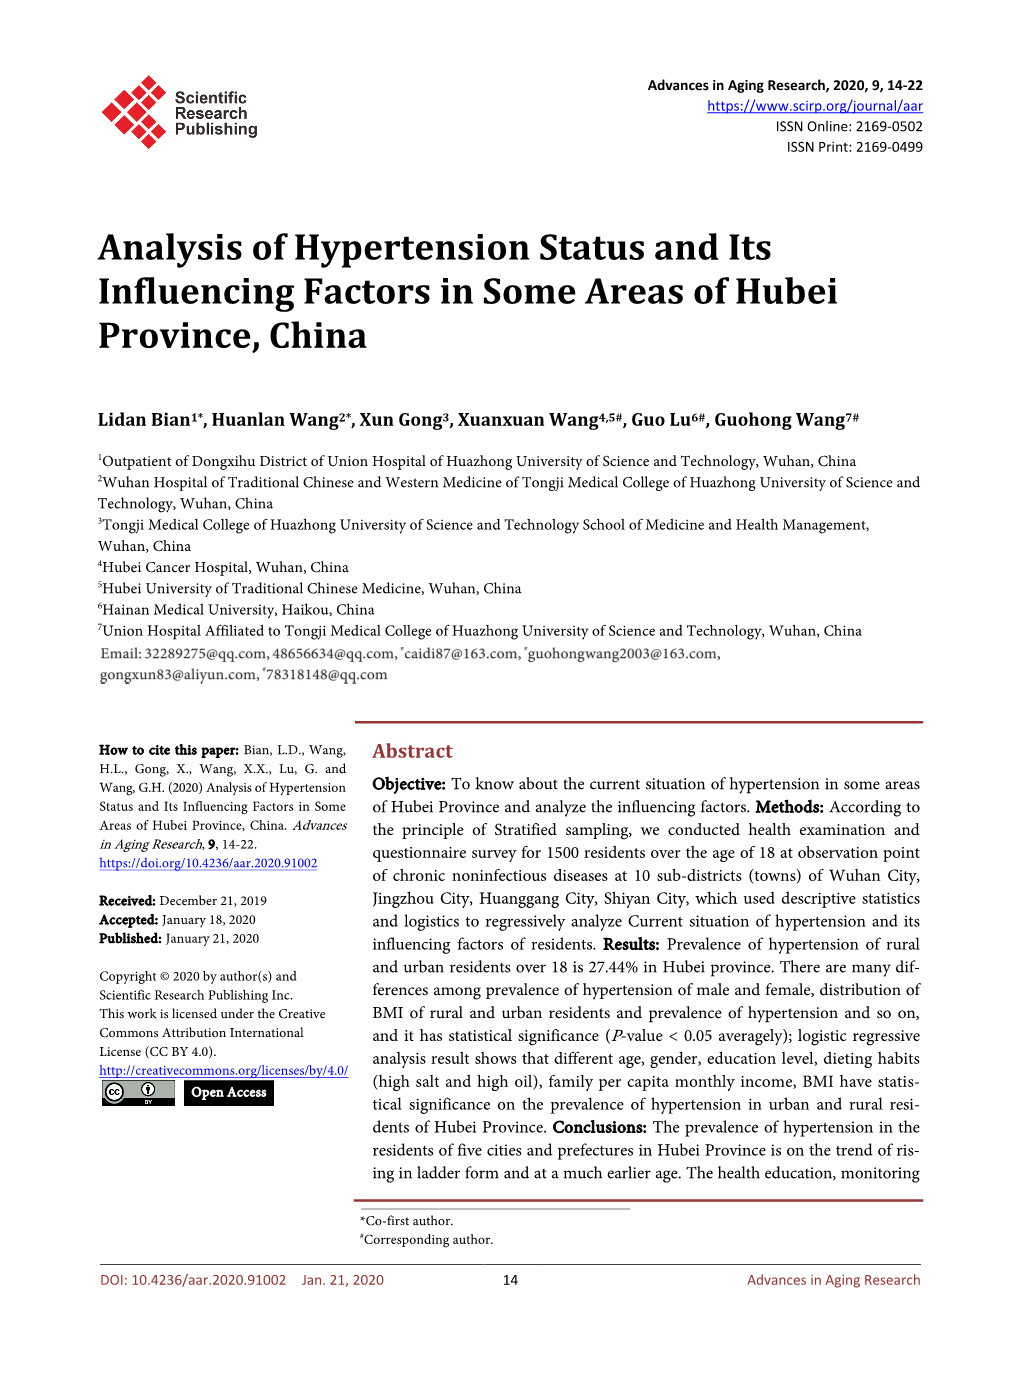 Analysis of Hypertension Status and Its Influencing Factors in Some Areas of Hubei Province, China